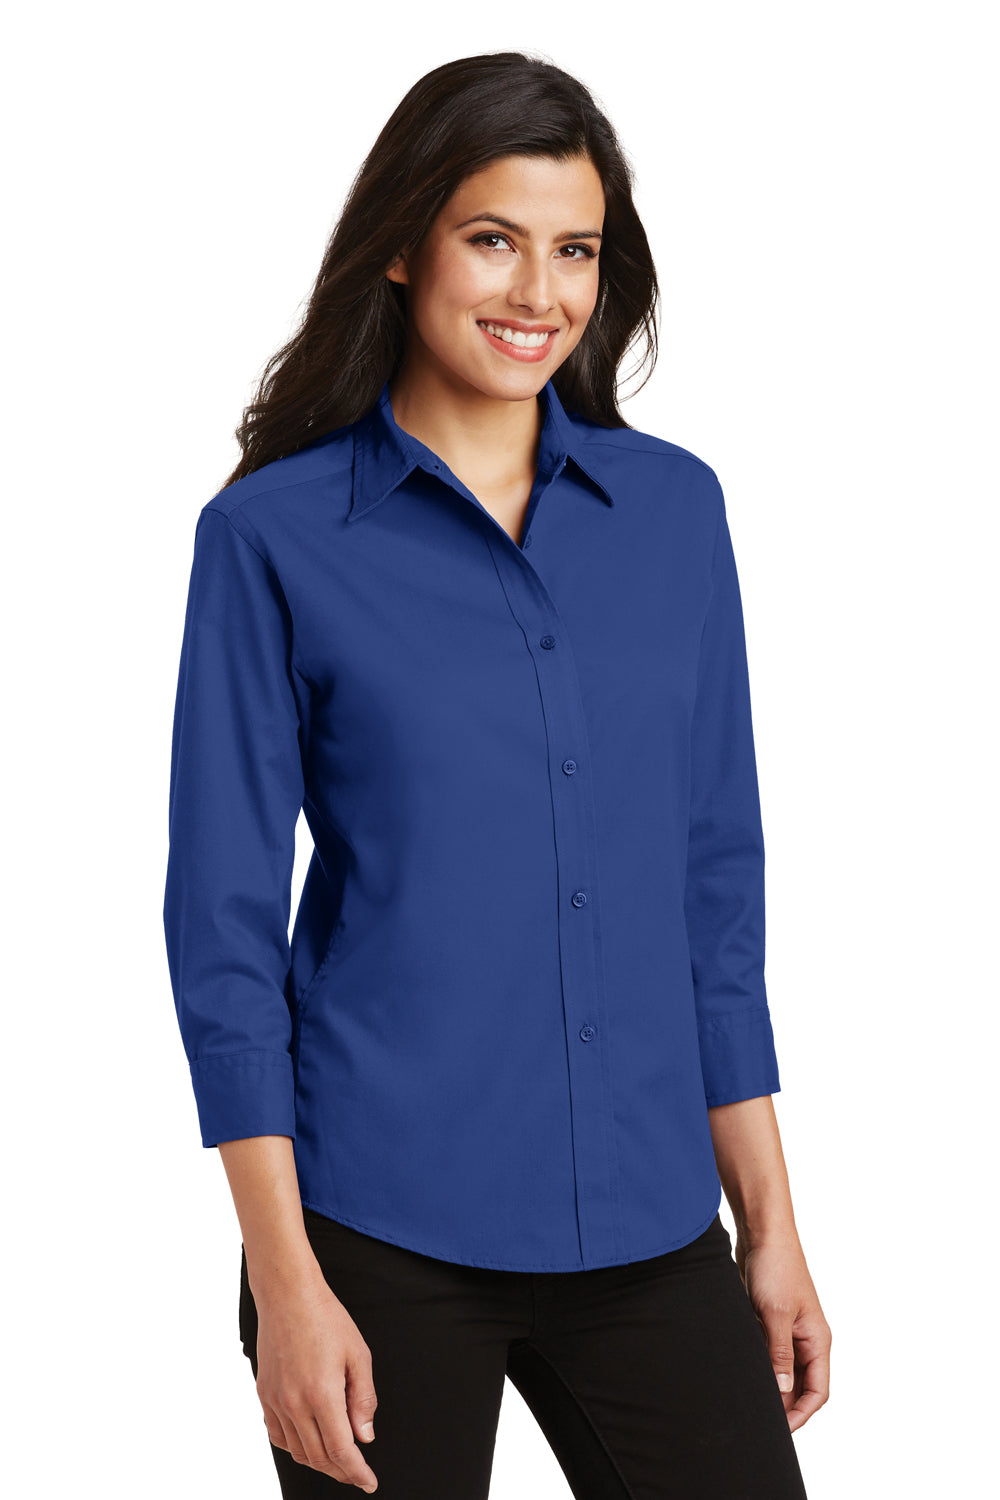 Port Authority L612 Womens Easy Care Wrinkle Resistant 3/4 Sleeve Button Down Shirt Royal Blue 3Q